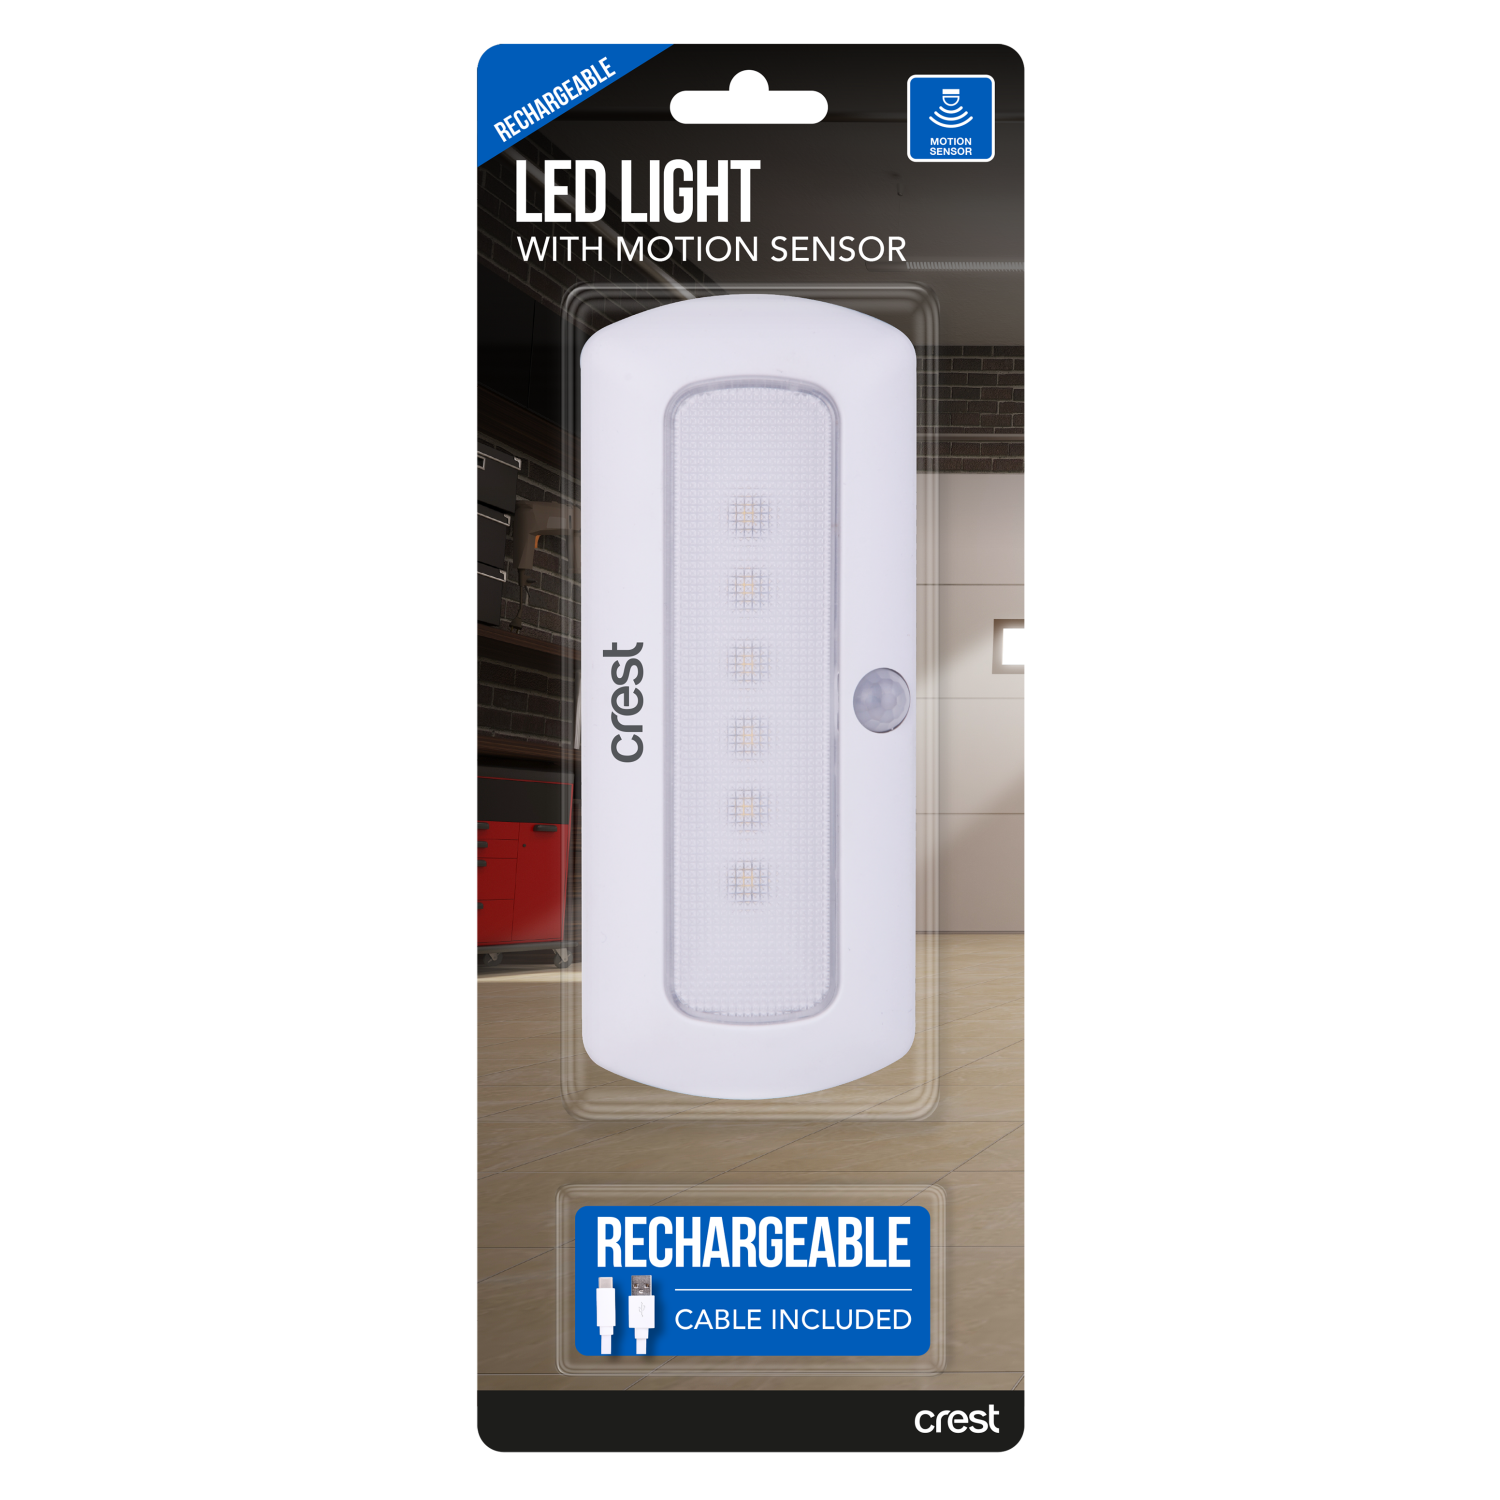 Rechargeable LED Light Compact with Motion Sensor